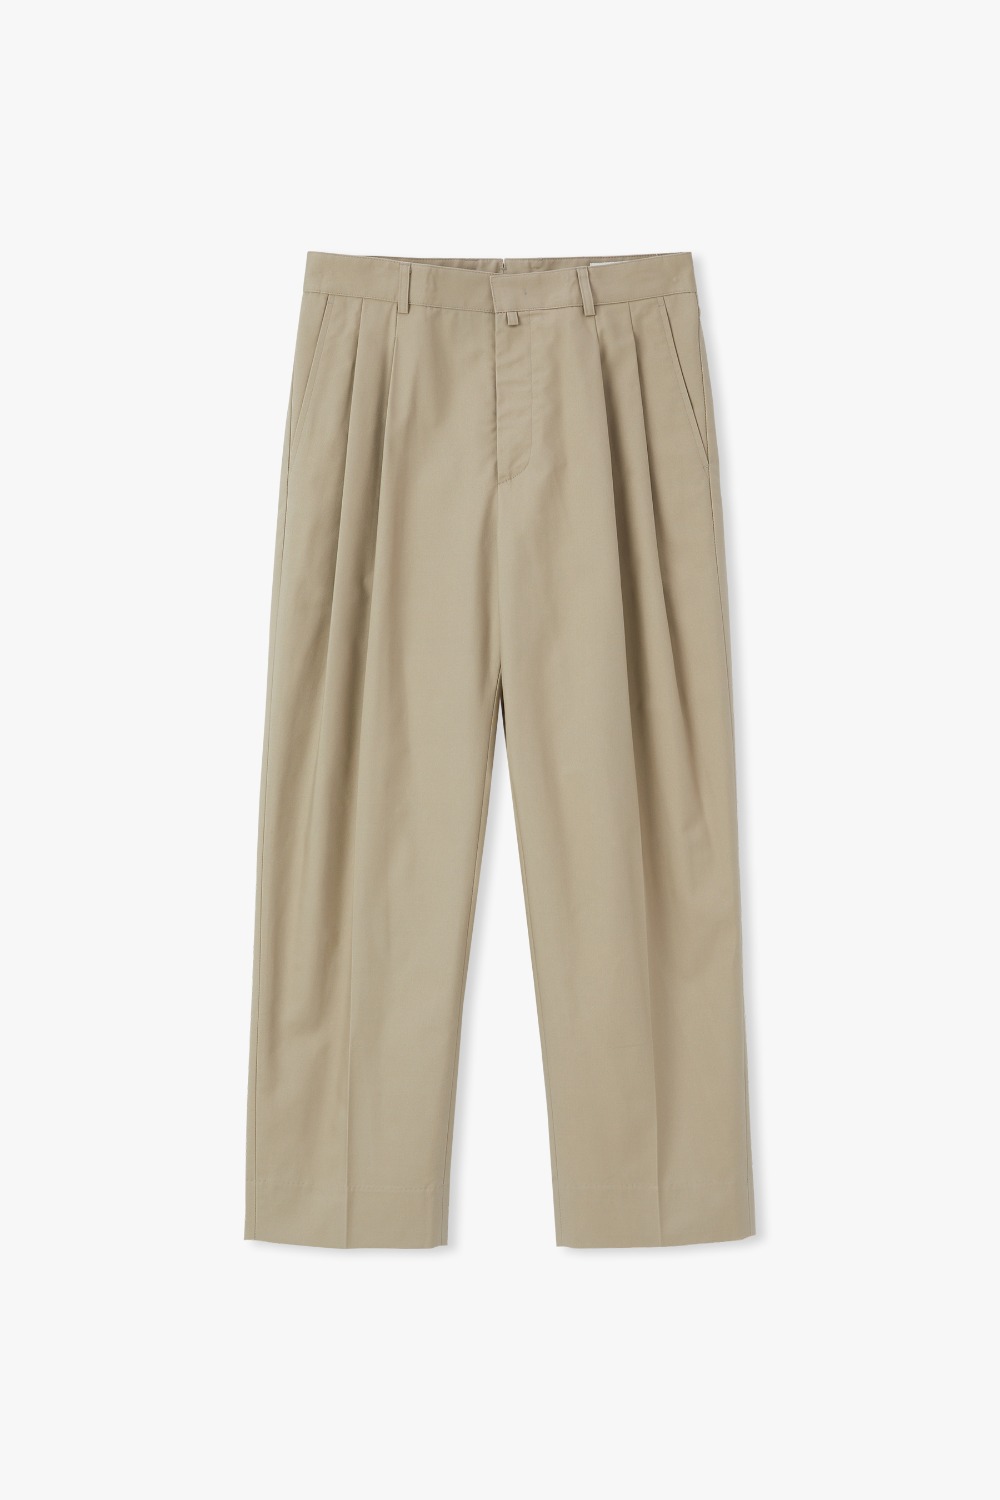 OYSTER R-802 TWO TUCK TAPERED COTTON DRILL CHINO PANTS (ECP MACHINE WASH TEST)